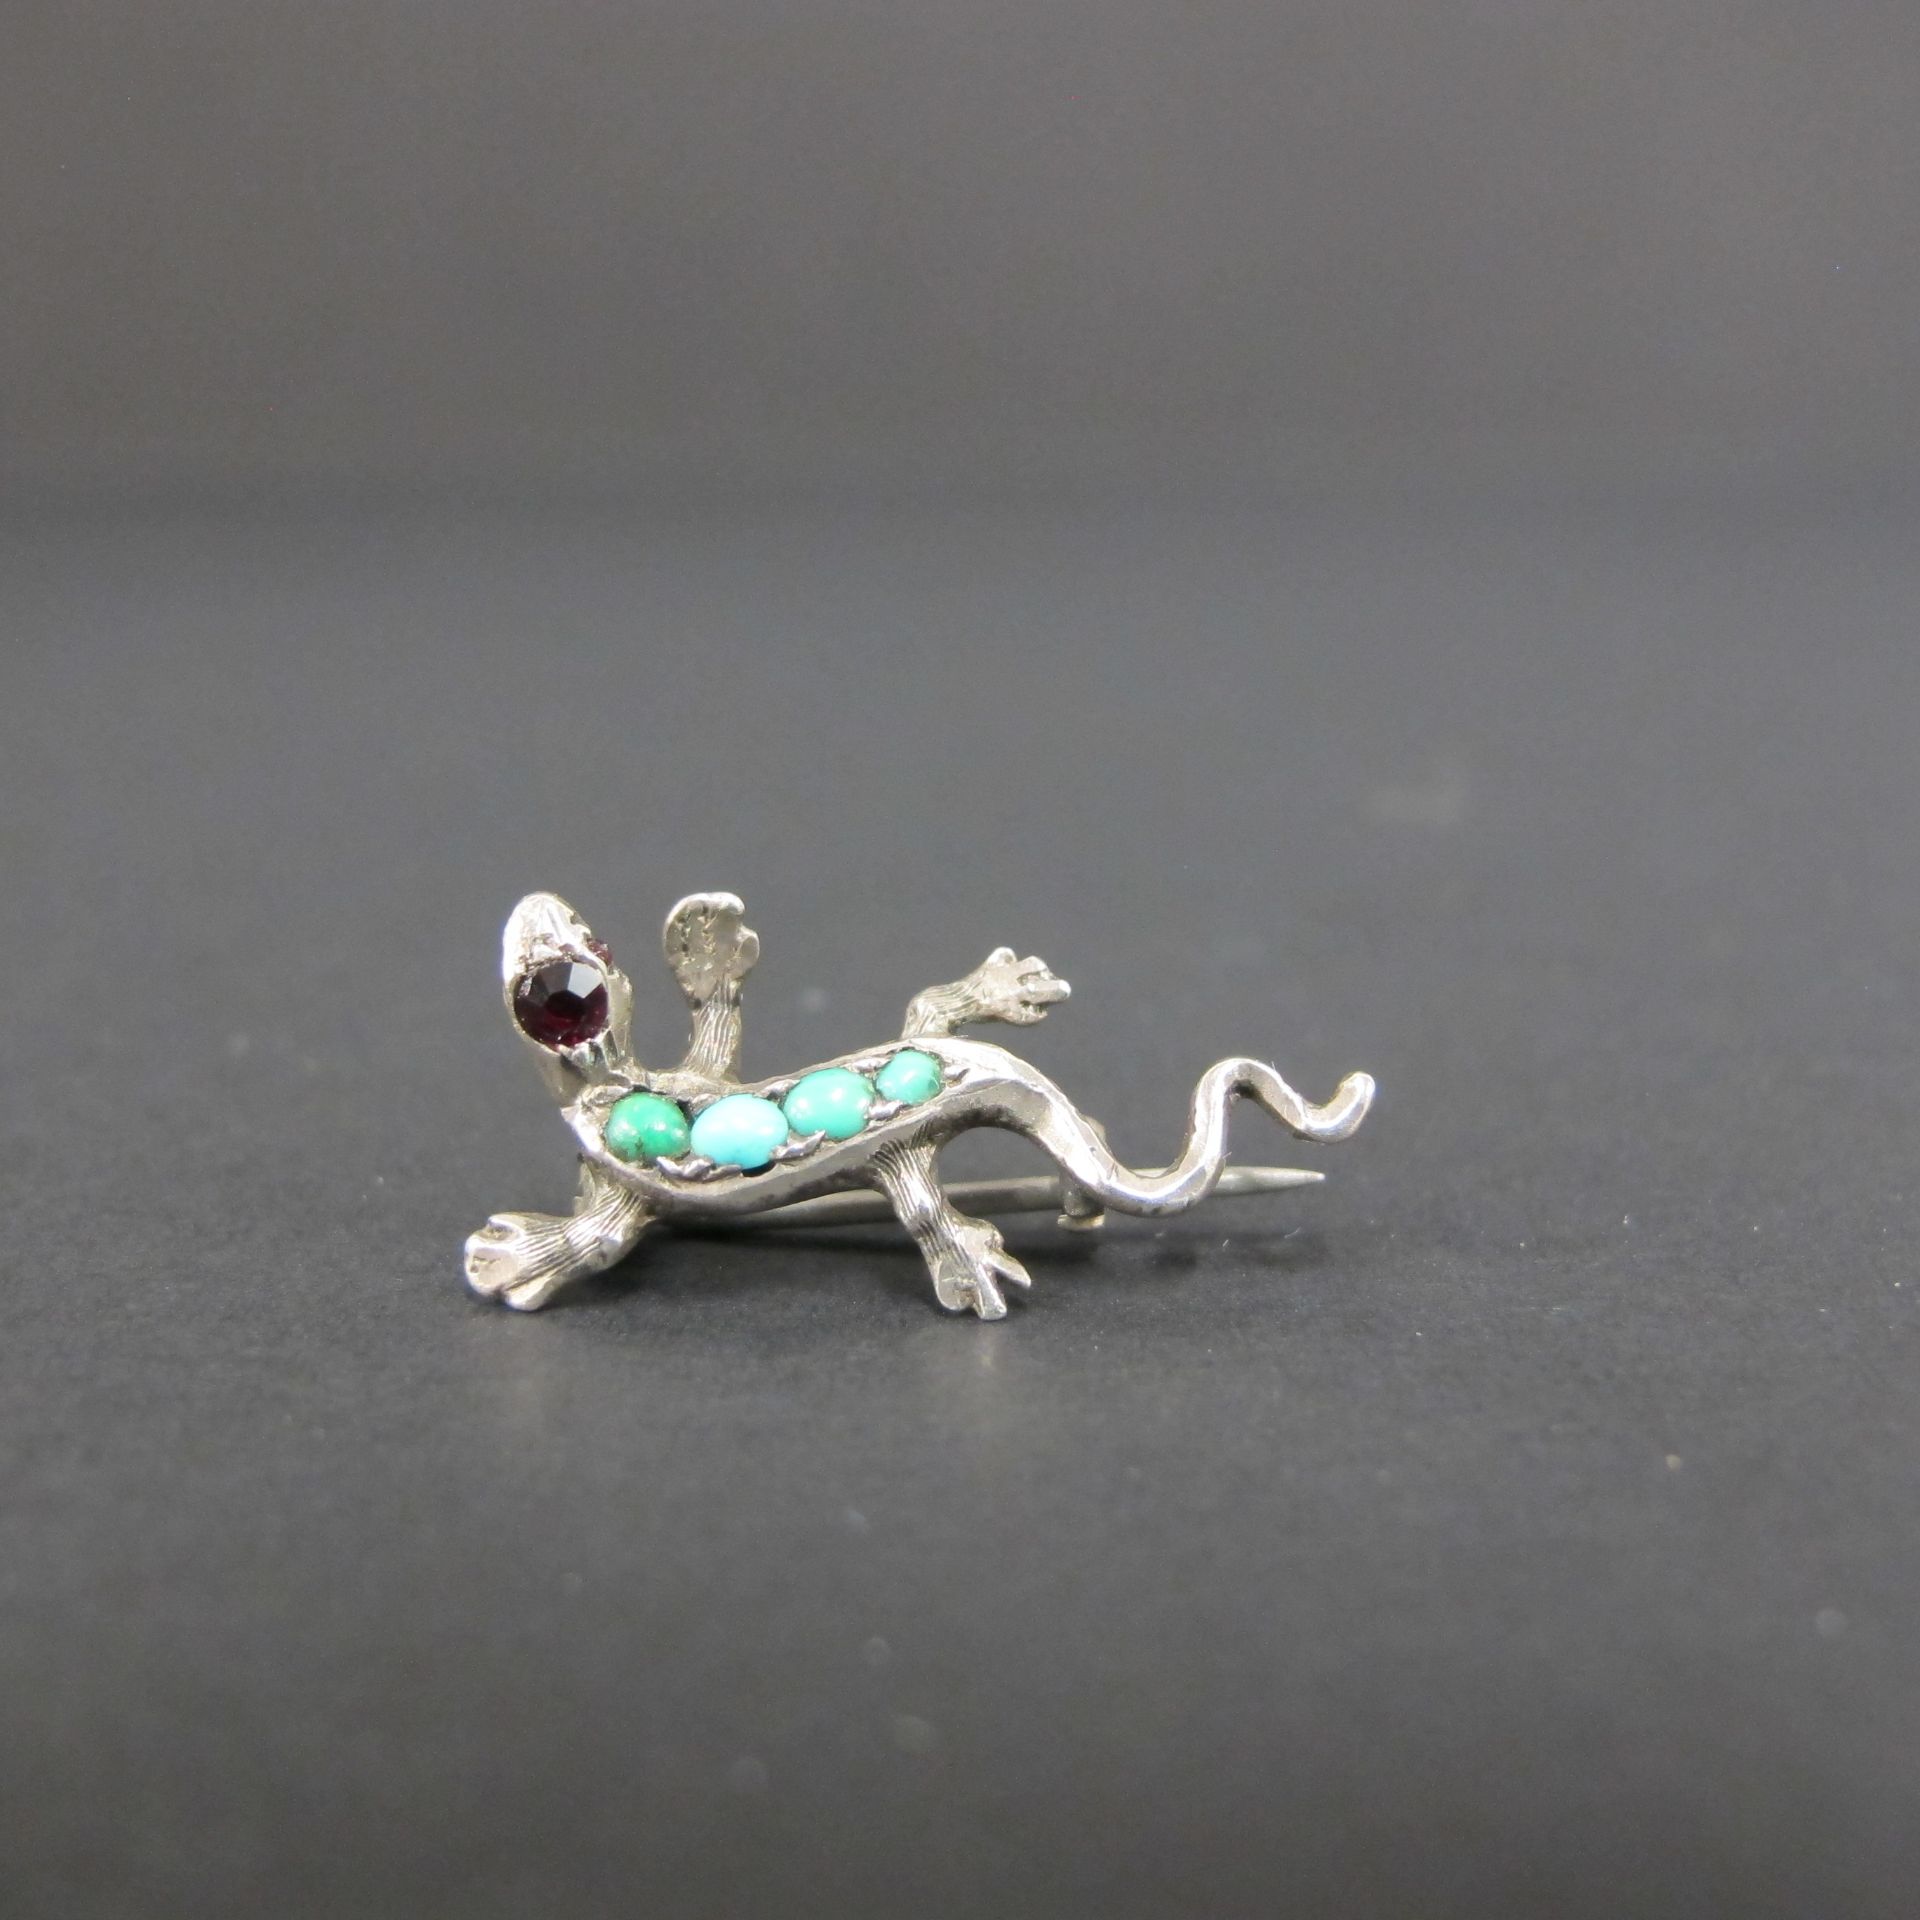 Antique silver turquoise-set lizard brooch (marked 800) (est £20-£40)